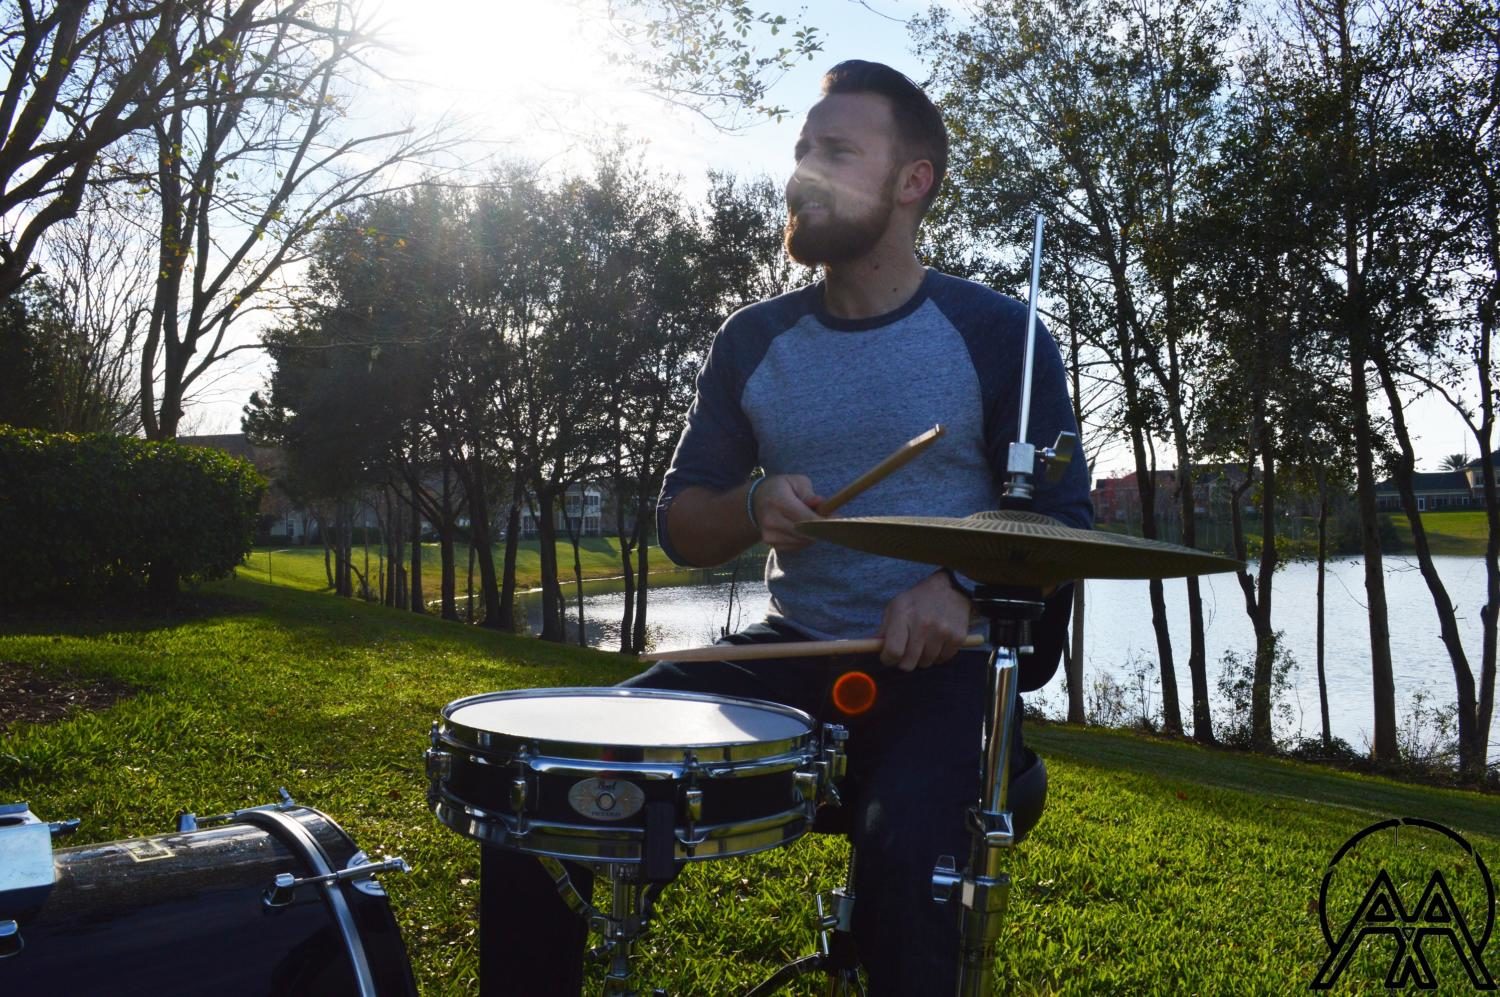 Follow Greg Hersey on Instagram @greghersey and marvel at his drumming godhood status.